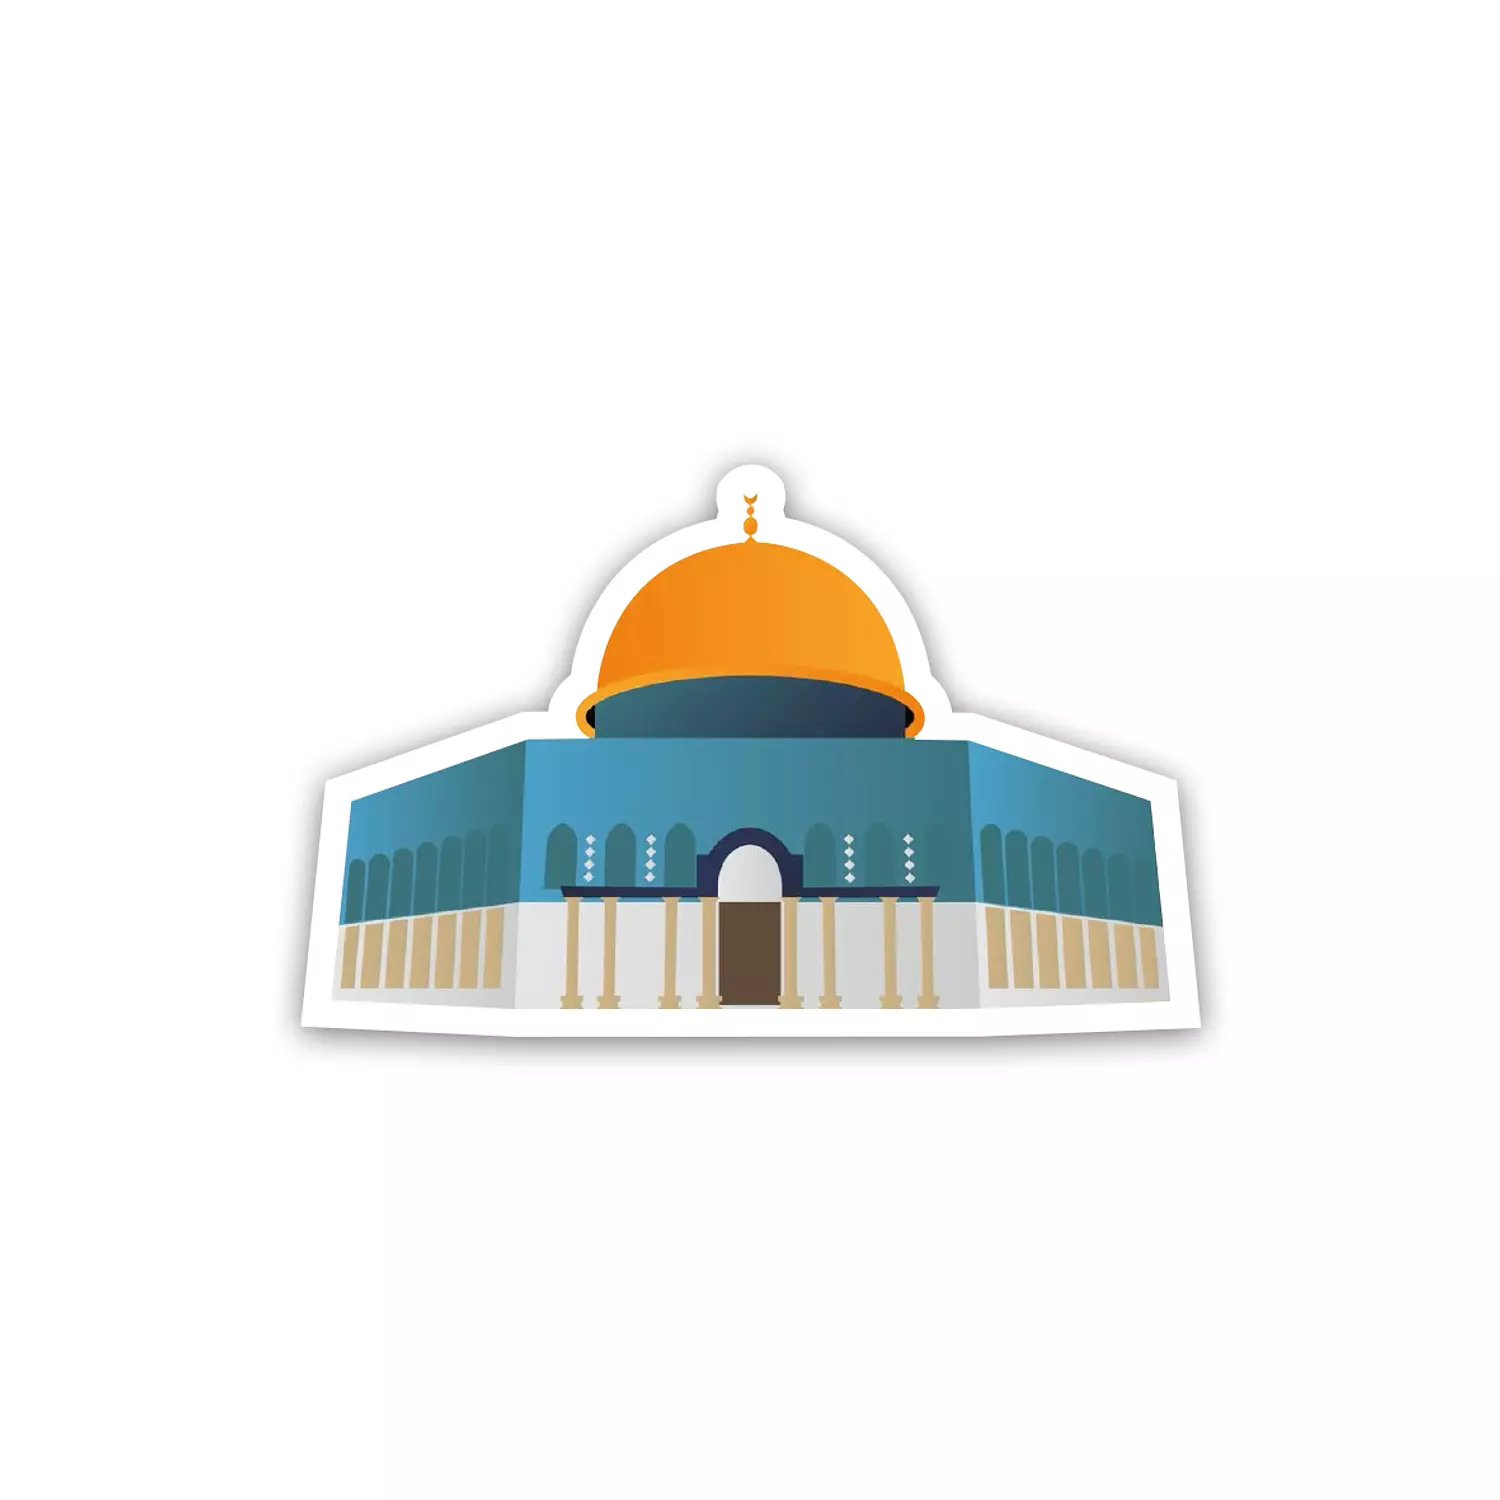 Dome of The Rock Mosque - Palestine  hover image